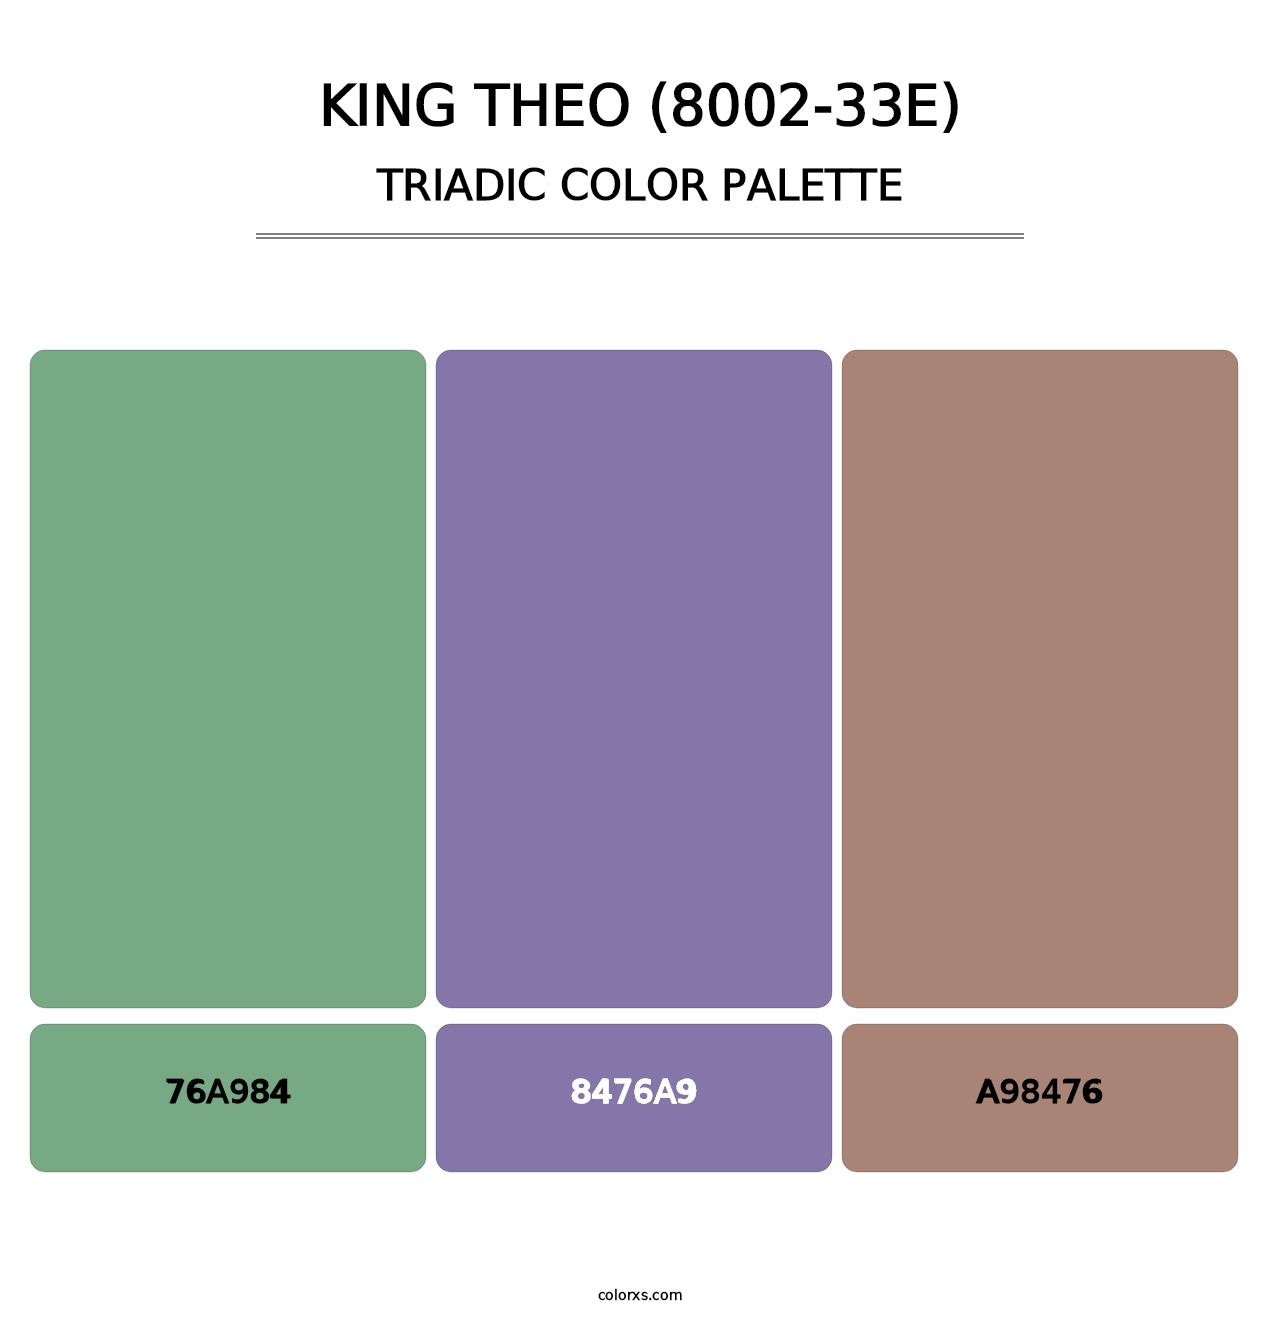 King Theo (8002-33E) - Triadic Color Palette